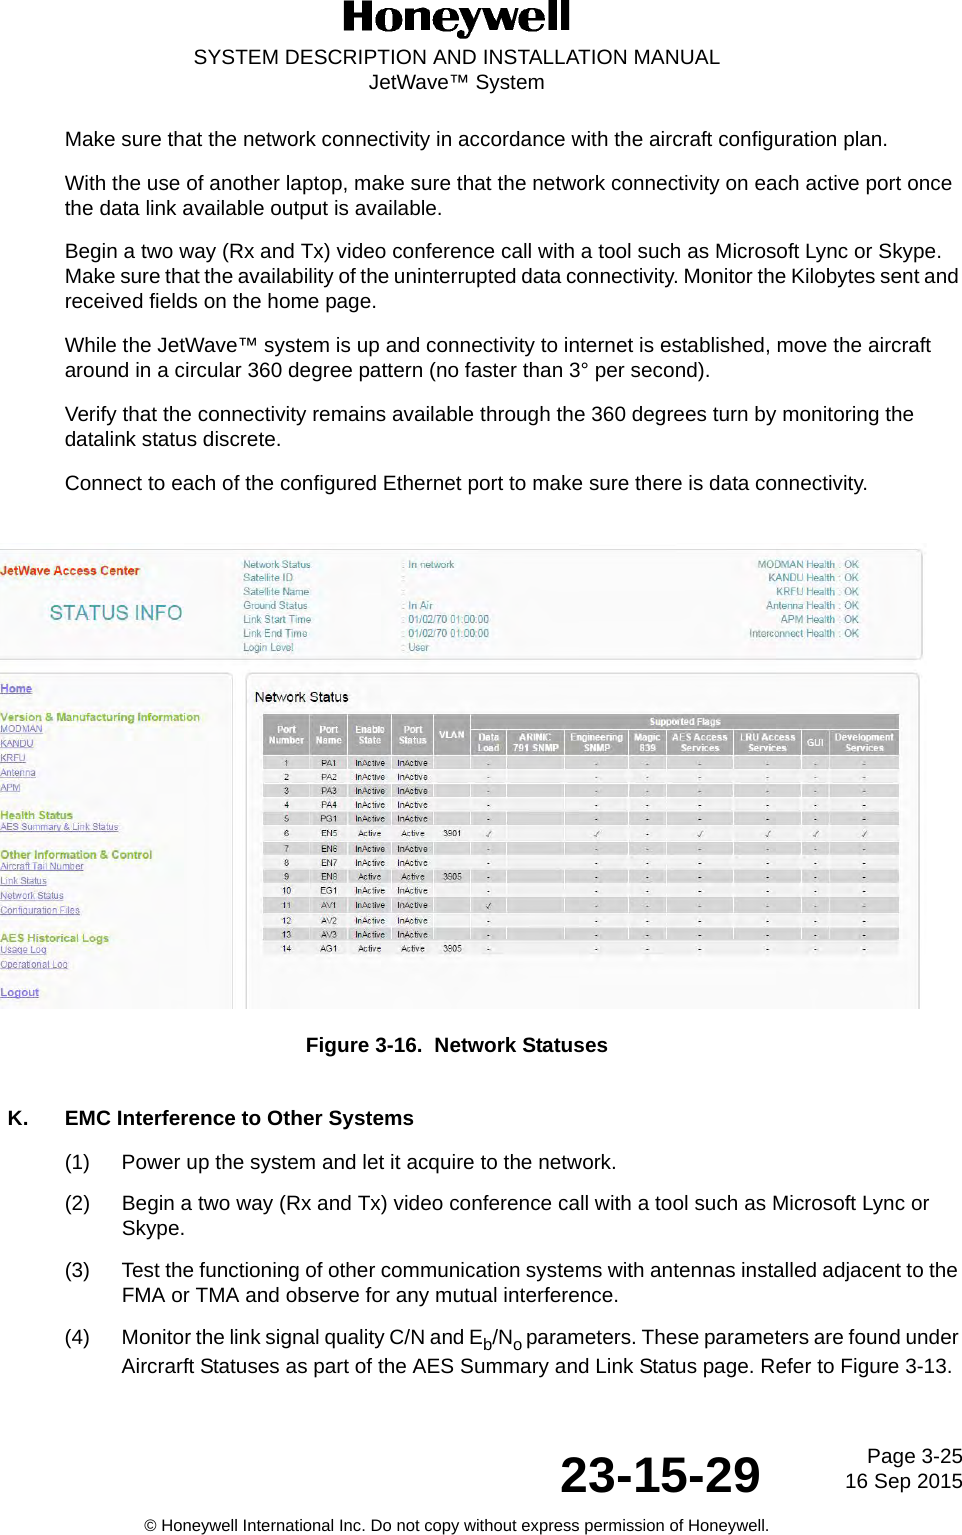 Page 3-2516 Sep 201523-15-29SYSTEM DESCRIPTION AND INSTALLATION MANUALJetWave™ System© Honeywell International Inc. Do not copy without express permission of Honeywell.Make sure that the network connectivity in accordance with the aircraft configuration plan. With the use of another laptop, make sure that the network connectivity on each active port once the data link available output is available. Begin a two way (Rx and Tx) video conference call with a tool such as Microsoft Lync or Skype. Make sure that the availability of the uninterrupted data connectivity. Monitor the Kilobytes sent and received fields on the home page. While the JetWave™ system is up and connectivity to internet is established, move the aircraft around in a circular 360 degree pattern (no faster than 3° per second). Verify that the connectivity remains available through the 360 degrees turn by monitoring the datalink status discrete.Connect to each of the configured Ethernet port to make sure there is data connectivity. Figure 3-16.  Network StatusesK. EMC Interference to Other Systems(1) Power up the system and let it acquire to the network. (2) Begin a two way (Rx and Tx) video conference call with a tool such as Microsoft Lync or Skype. (3) Test the functioning of other communication systems with antennas installed adjacent to the FMA or TMA and observe for any mutual interference. (4) Monitor the link signal quality C/N and Eb/No parameters. These parameters are found under Aircrarft Statuses as part of the AES Summary and Link Status page. Refer to Figure 3-13.